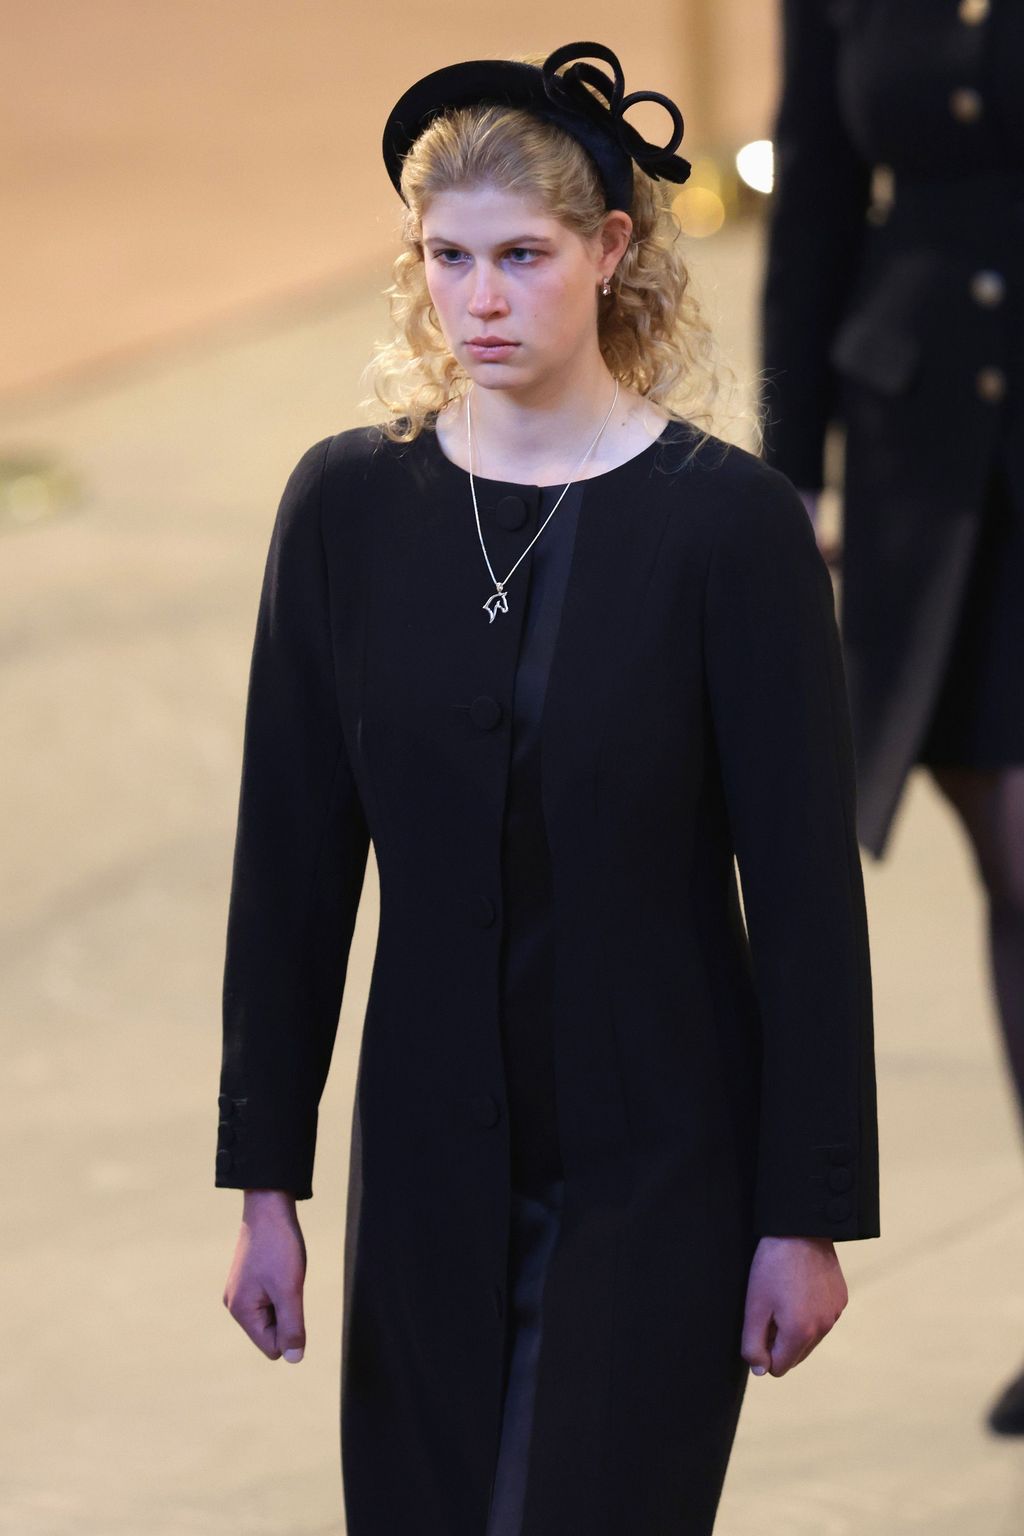 LONDON, ENGLAND - SEPTEMBER 17: Lady Louise Windsor is seen during a vigil in honour of Queen Elizabeth II at Westminster Hall on September 17, 2022 in London, England. Queen Elizabeth II's grandchildren mount a family vigil over her coffin lying in state in Westminster Hall. Queen Elizabeth II died at Balmoral Castle in Scotland on September 8, 2022, and is succeeded by her eldest son, King Charles III. (Photo by Chris Jackson/Getty Images)